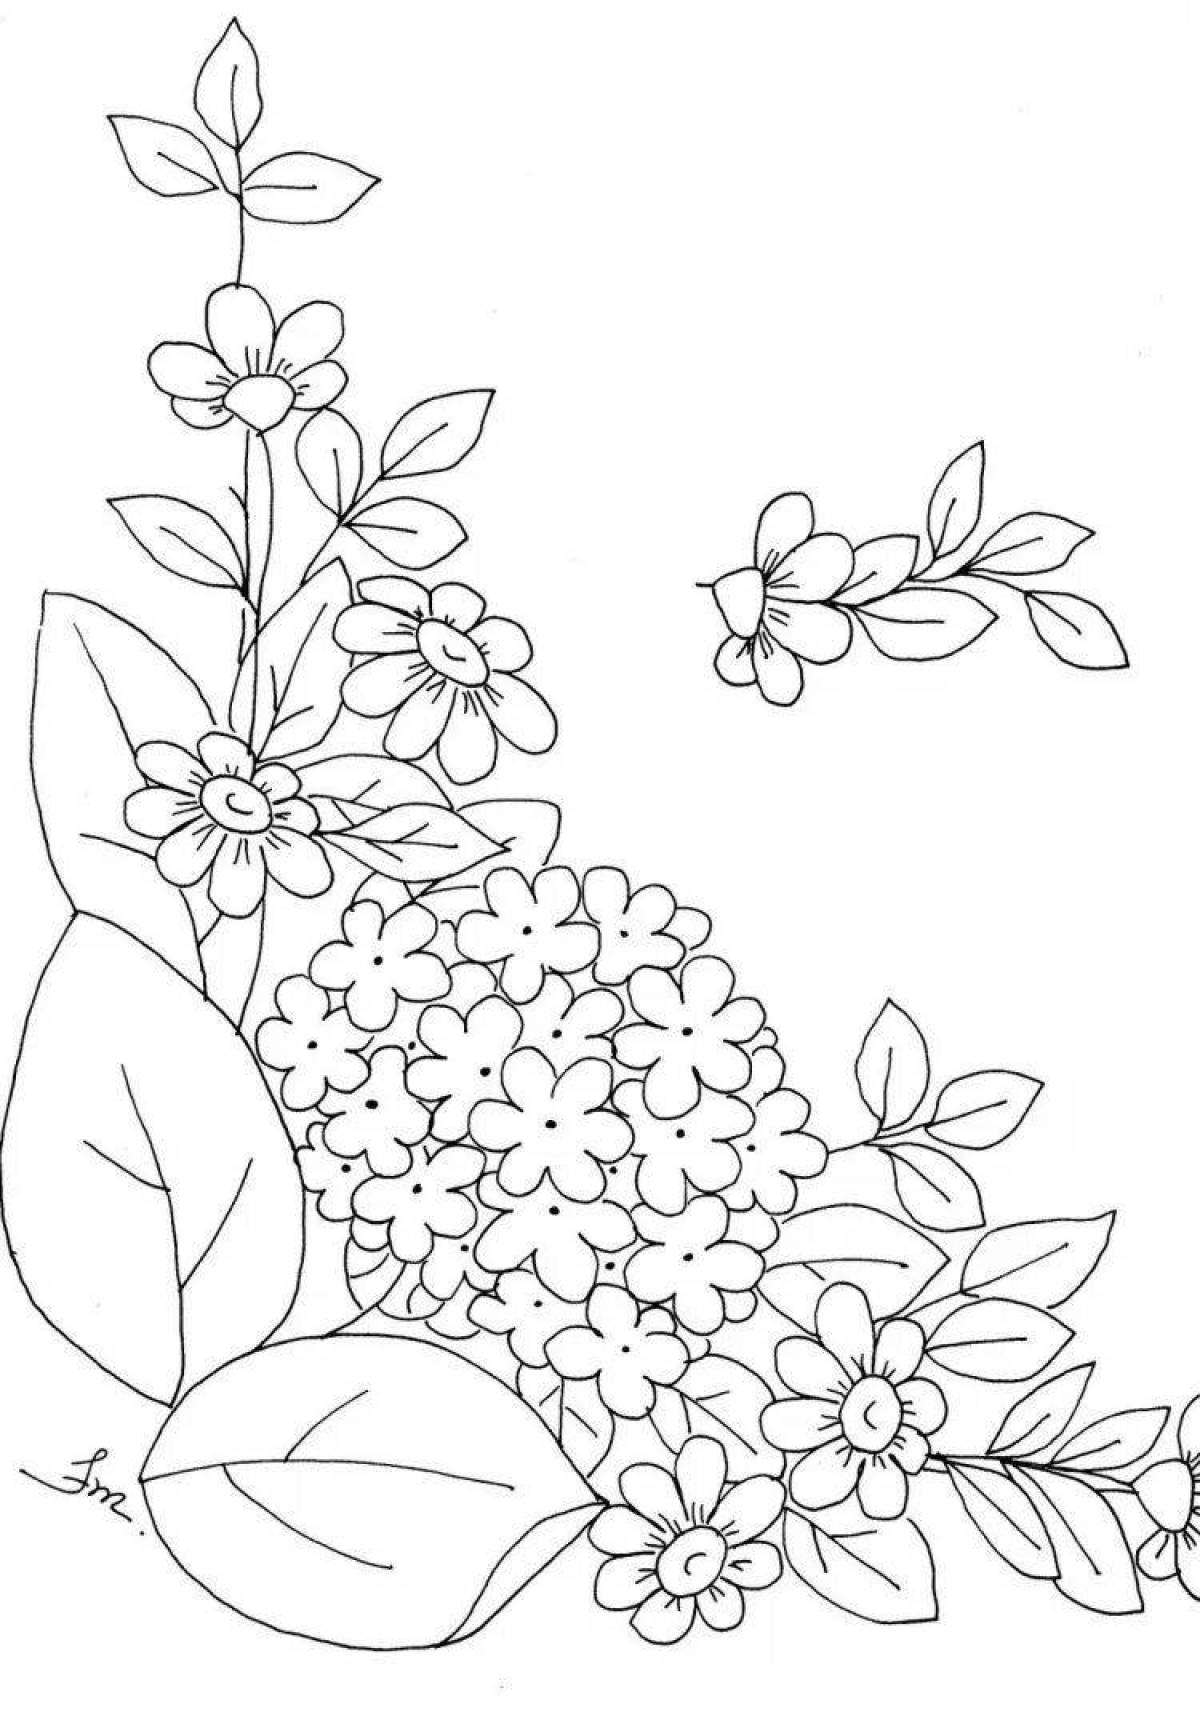 Delightful lilac coloring book for kids